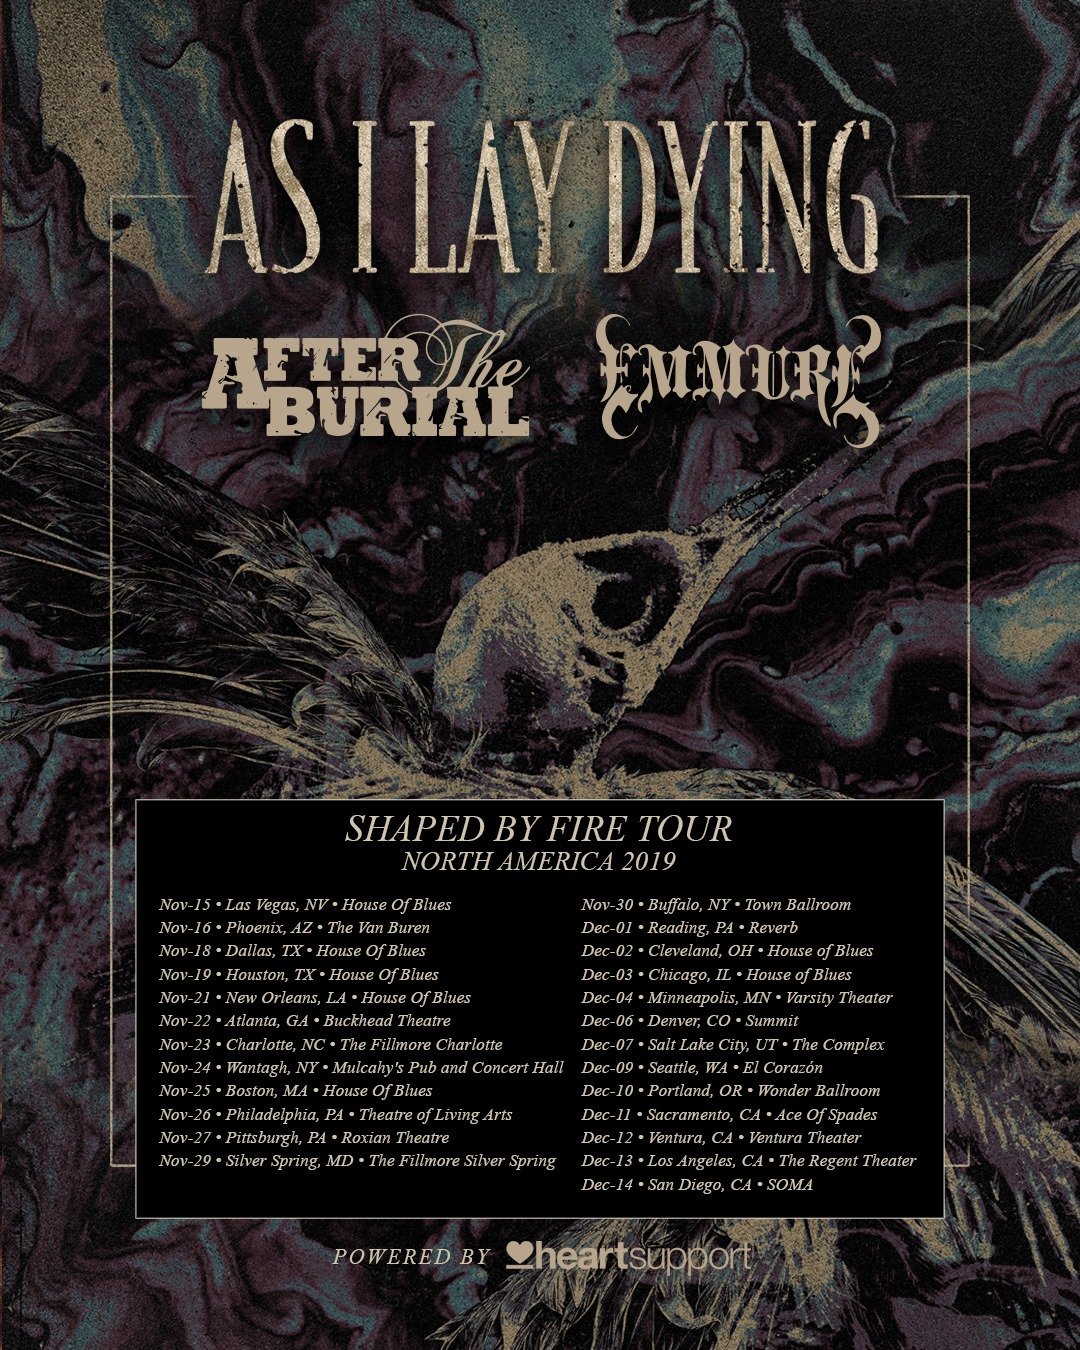 As I Lay Dying returning to Las Vegas in November!